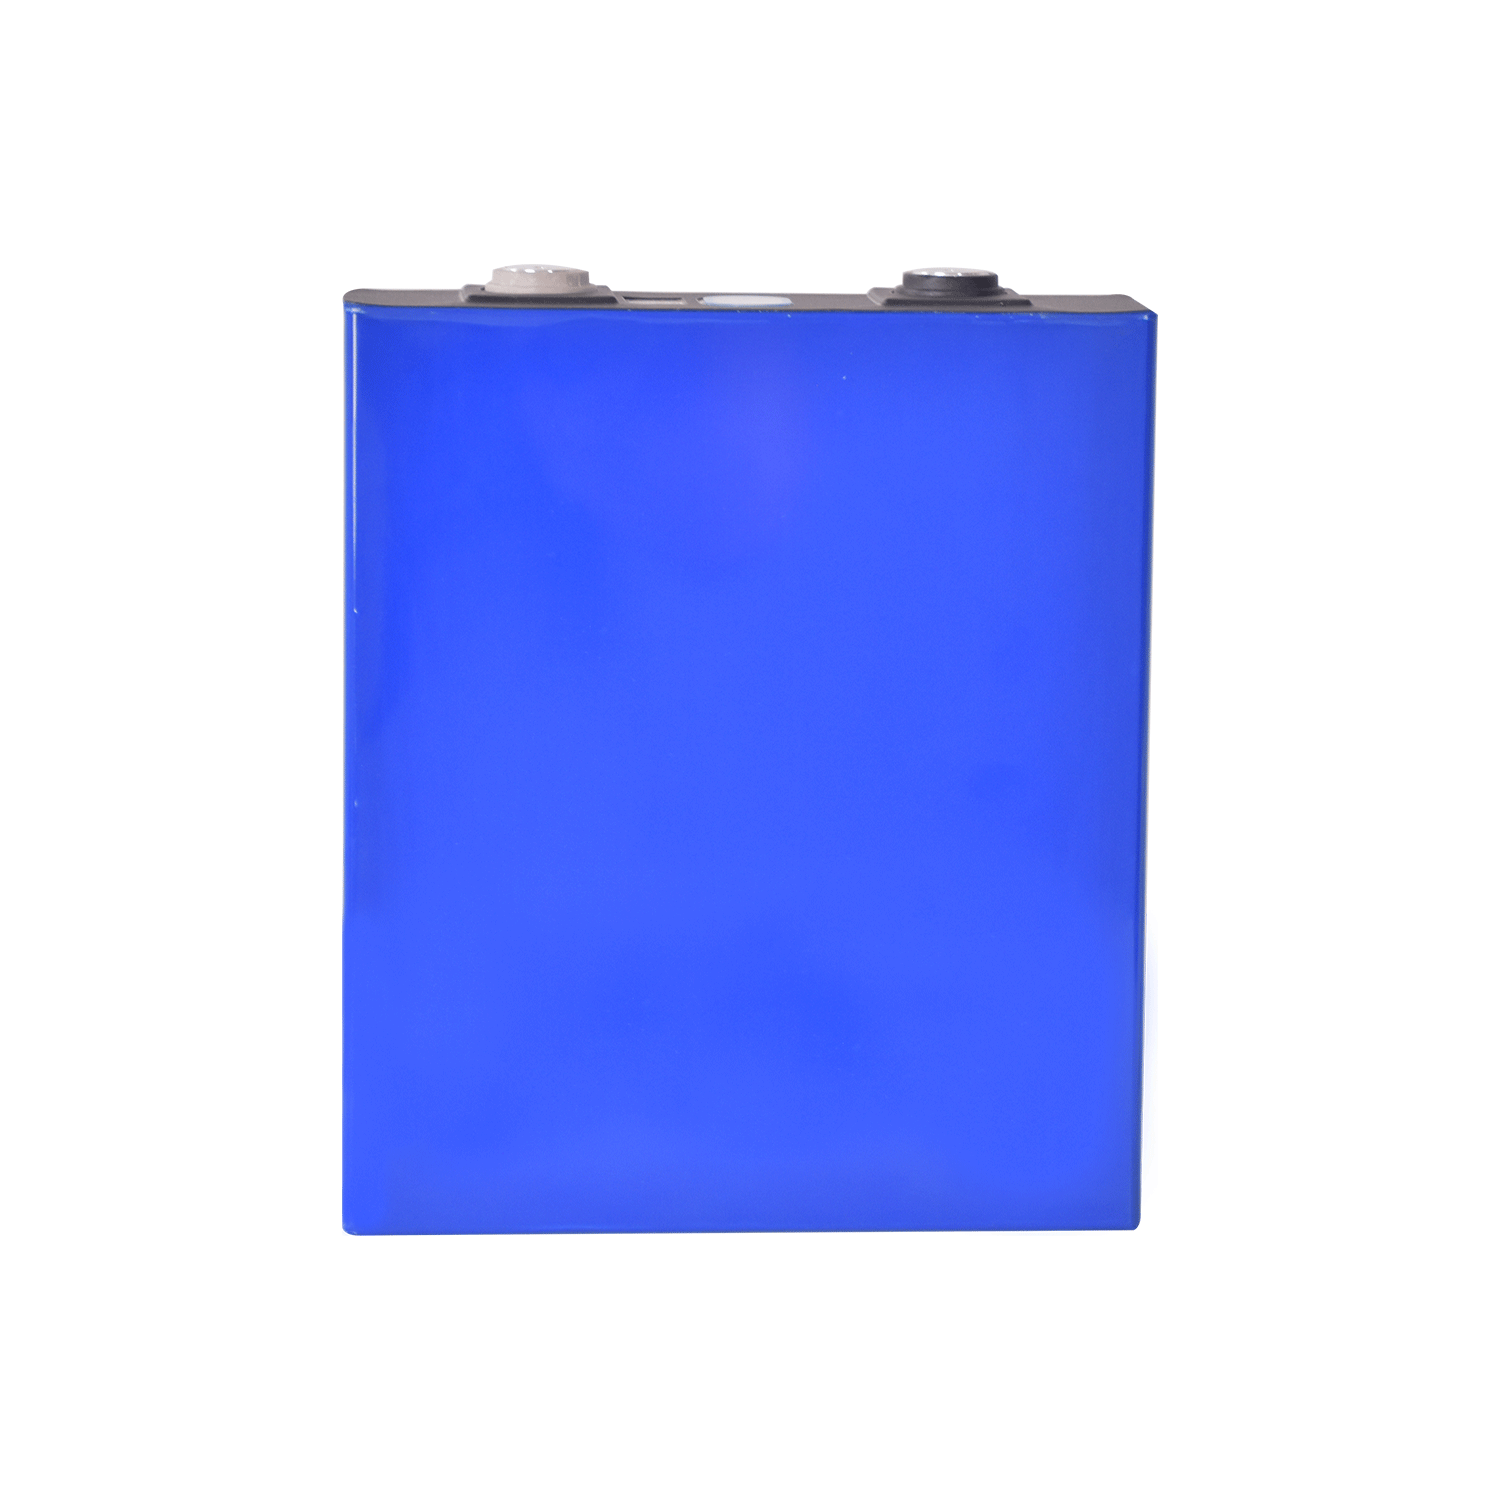 odm lithium ion battery solar charger manufacturer